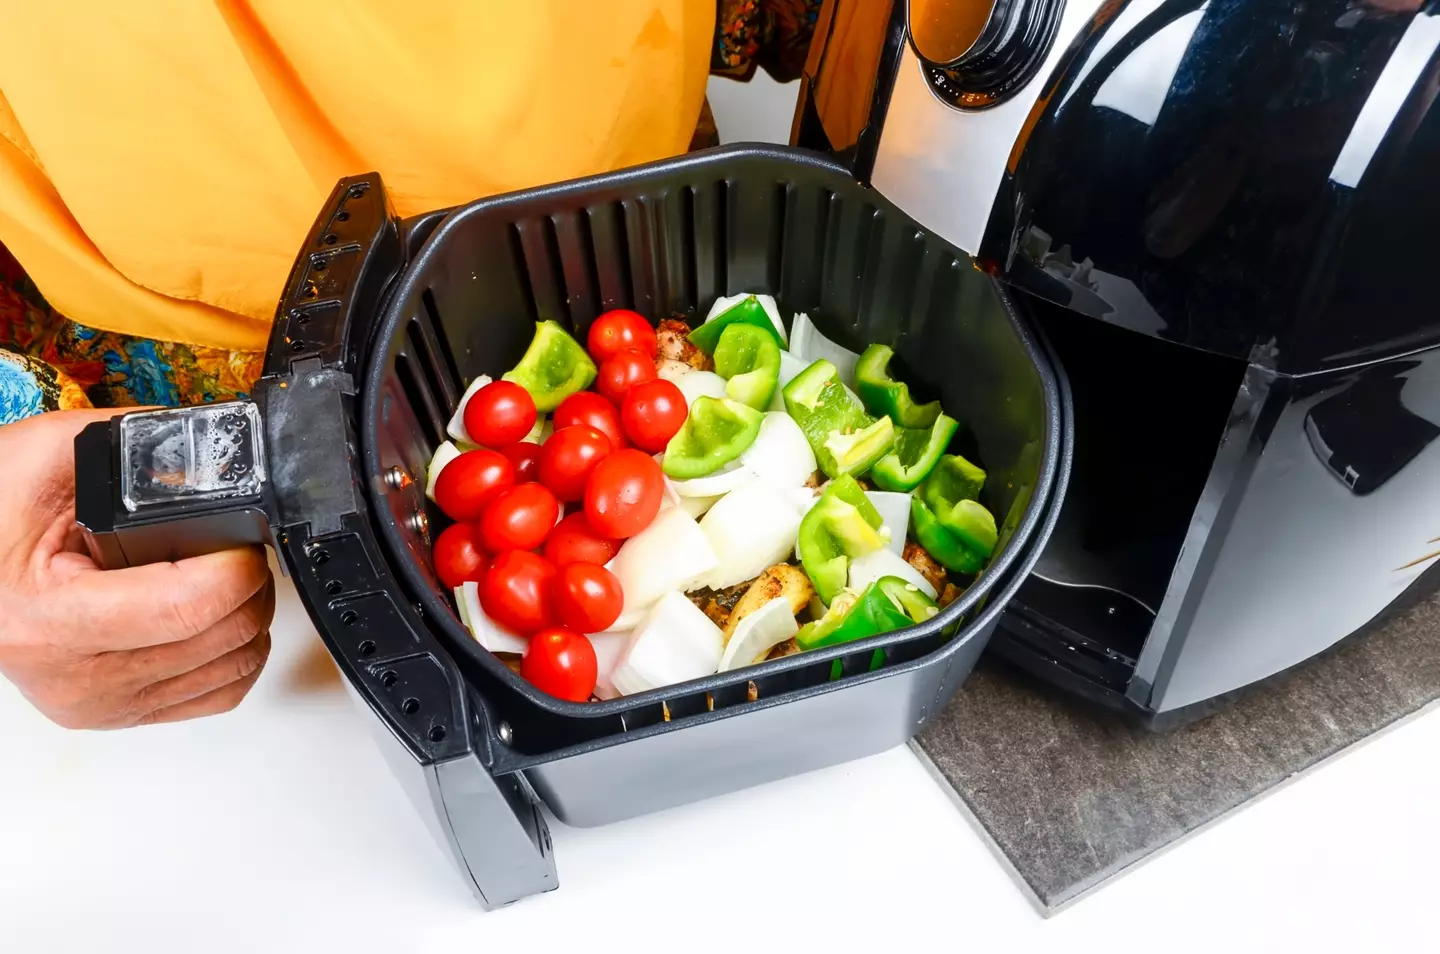 Air fryers are great for crisping up veggies. (Getty Stock Images)